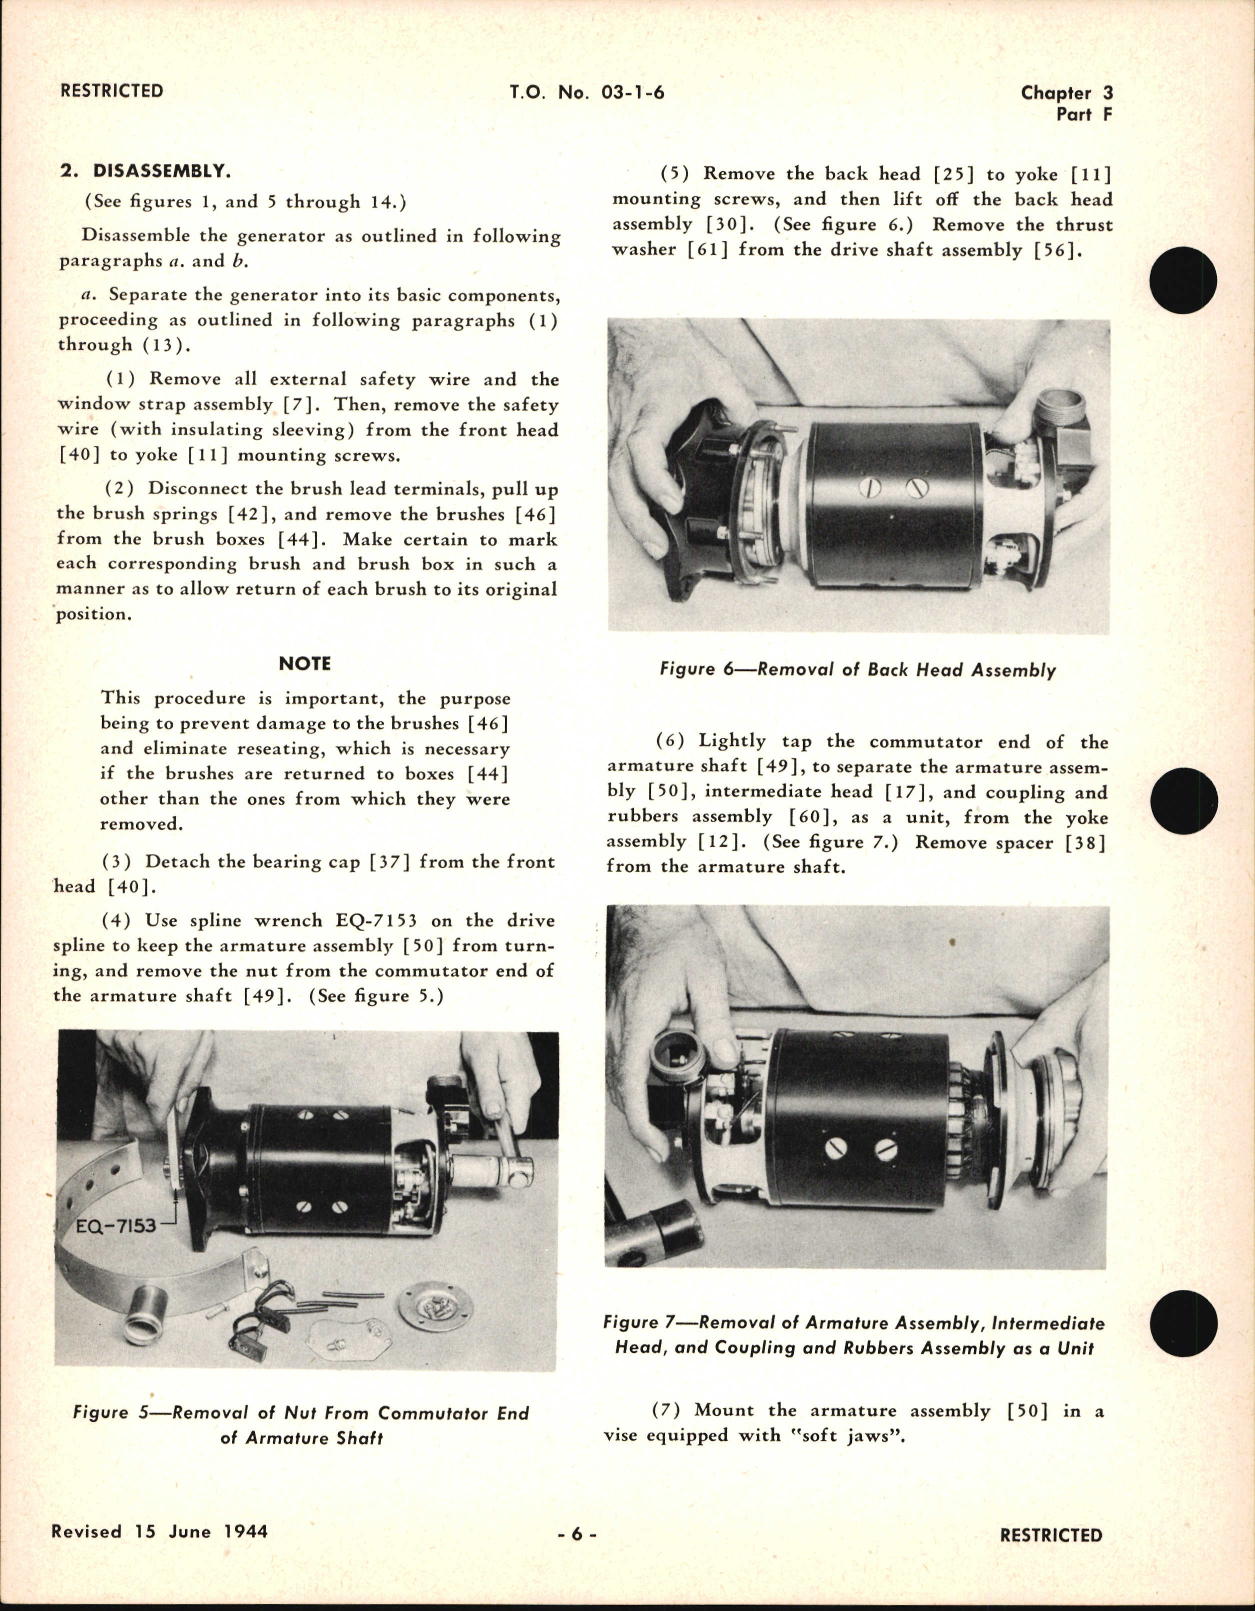 Sample page 6 from AirCorps Library document: Overhaul Instructions for Engine Driven Single Voltage D-C Generator, Type 1235